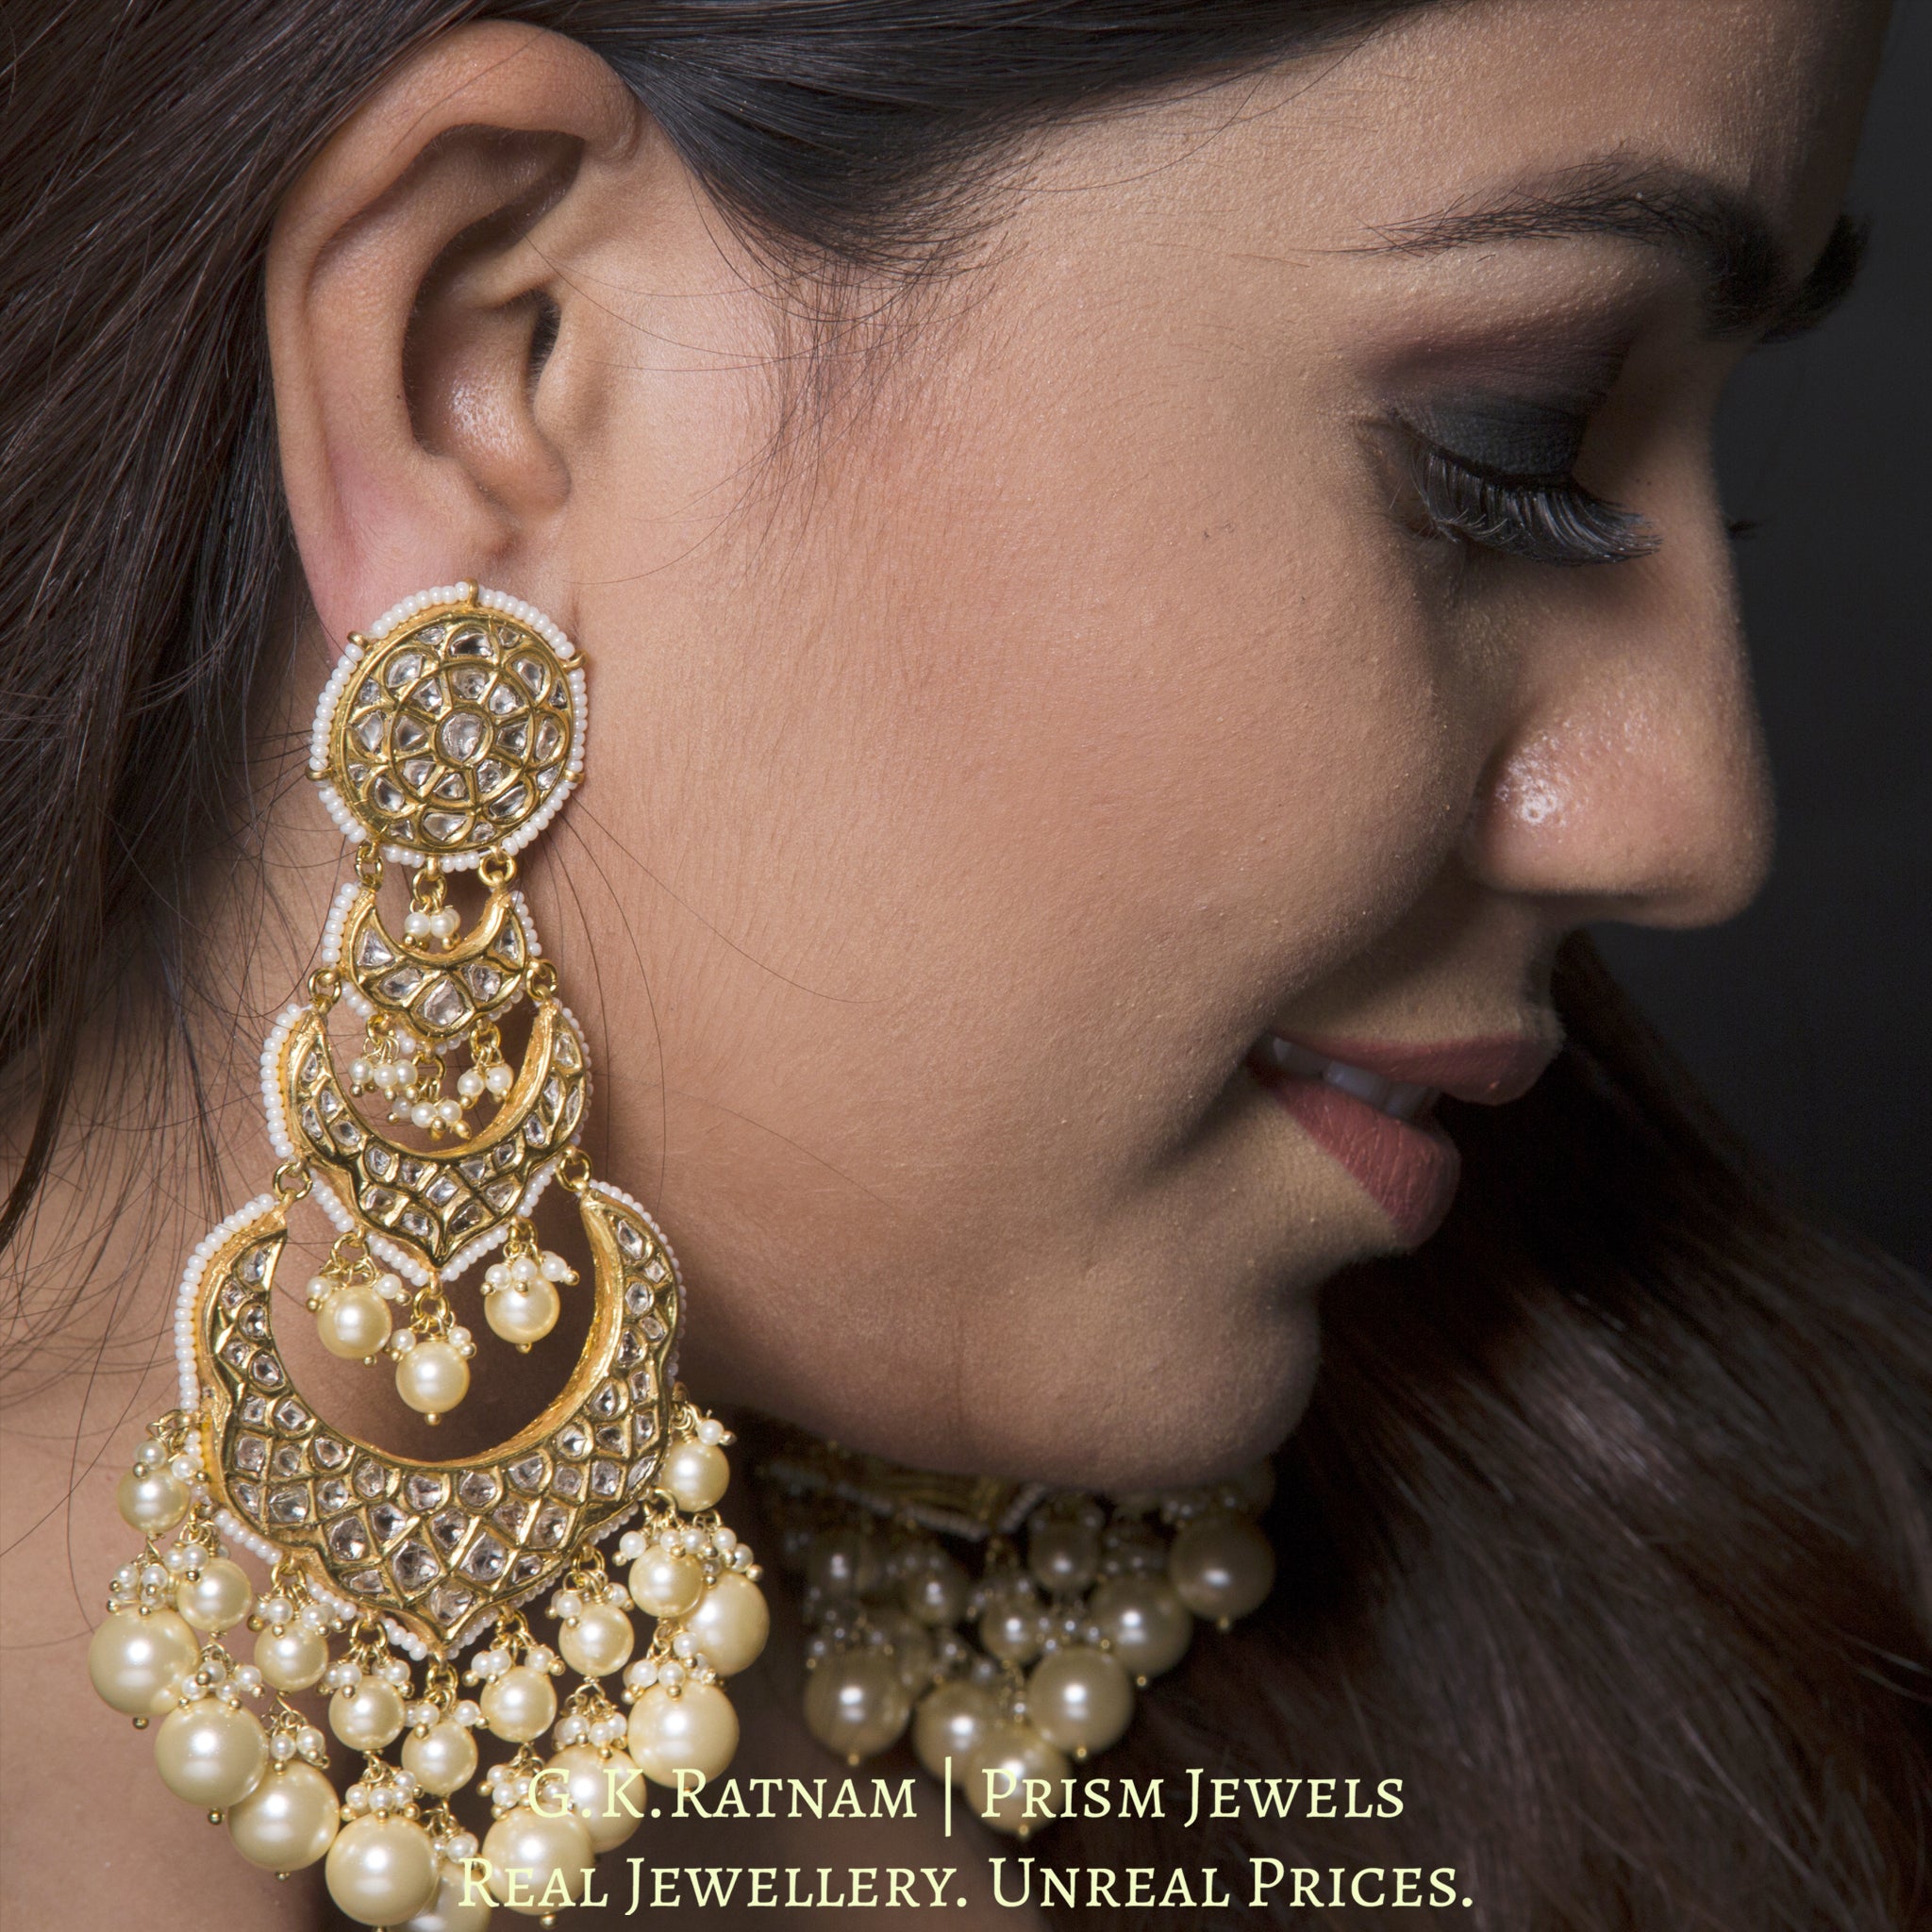 23k Gold and Diamond Polki Long Chand Bali Earring Pair with lustrous south-sea grade shell pearls